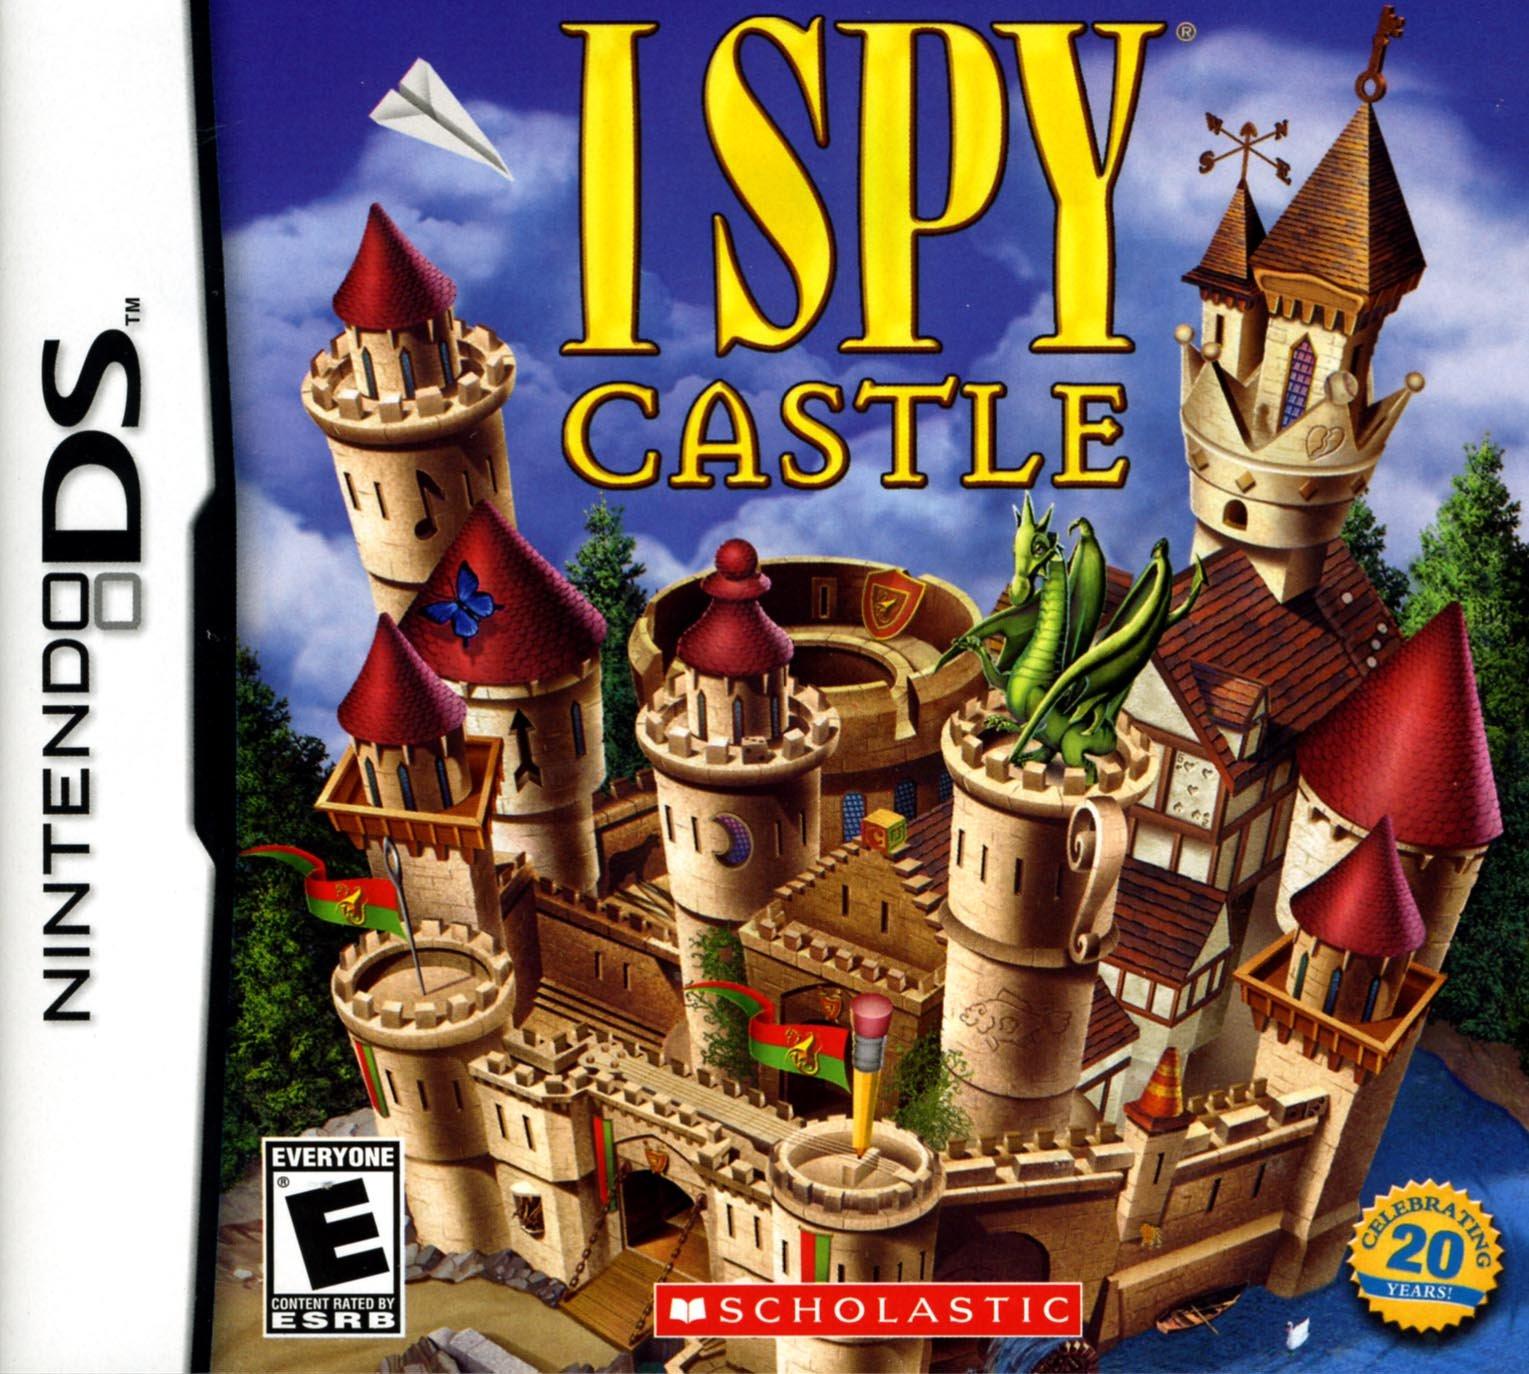 Defend Your Castle  Internet games, Coloring books, Classic games